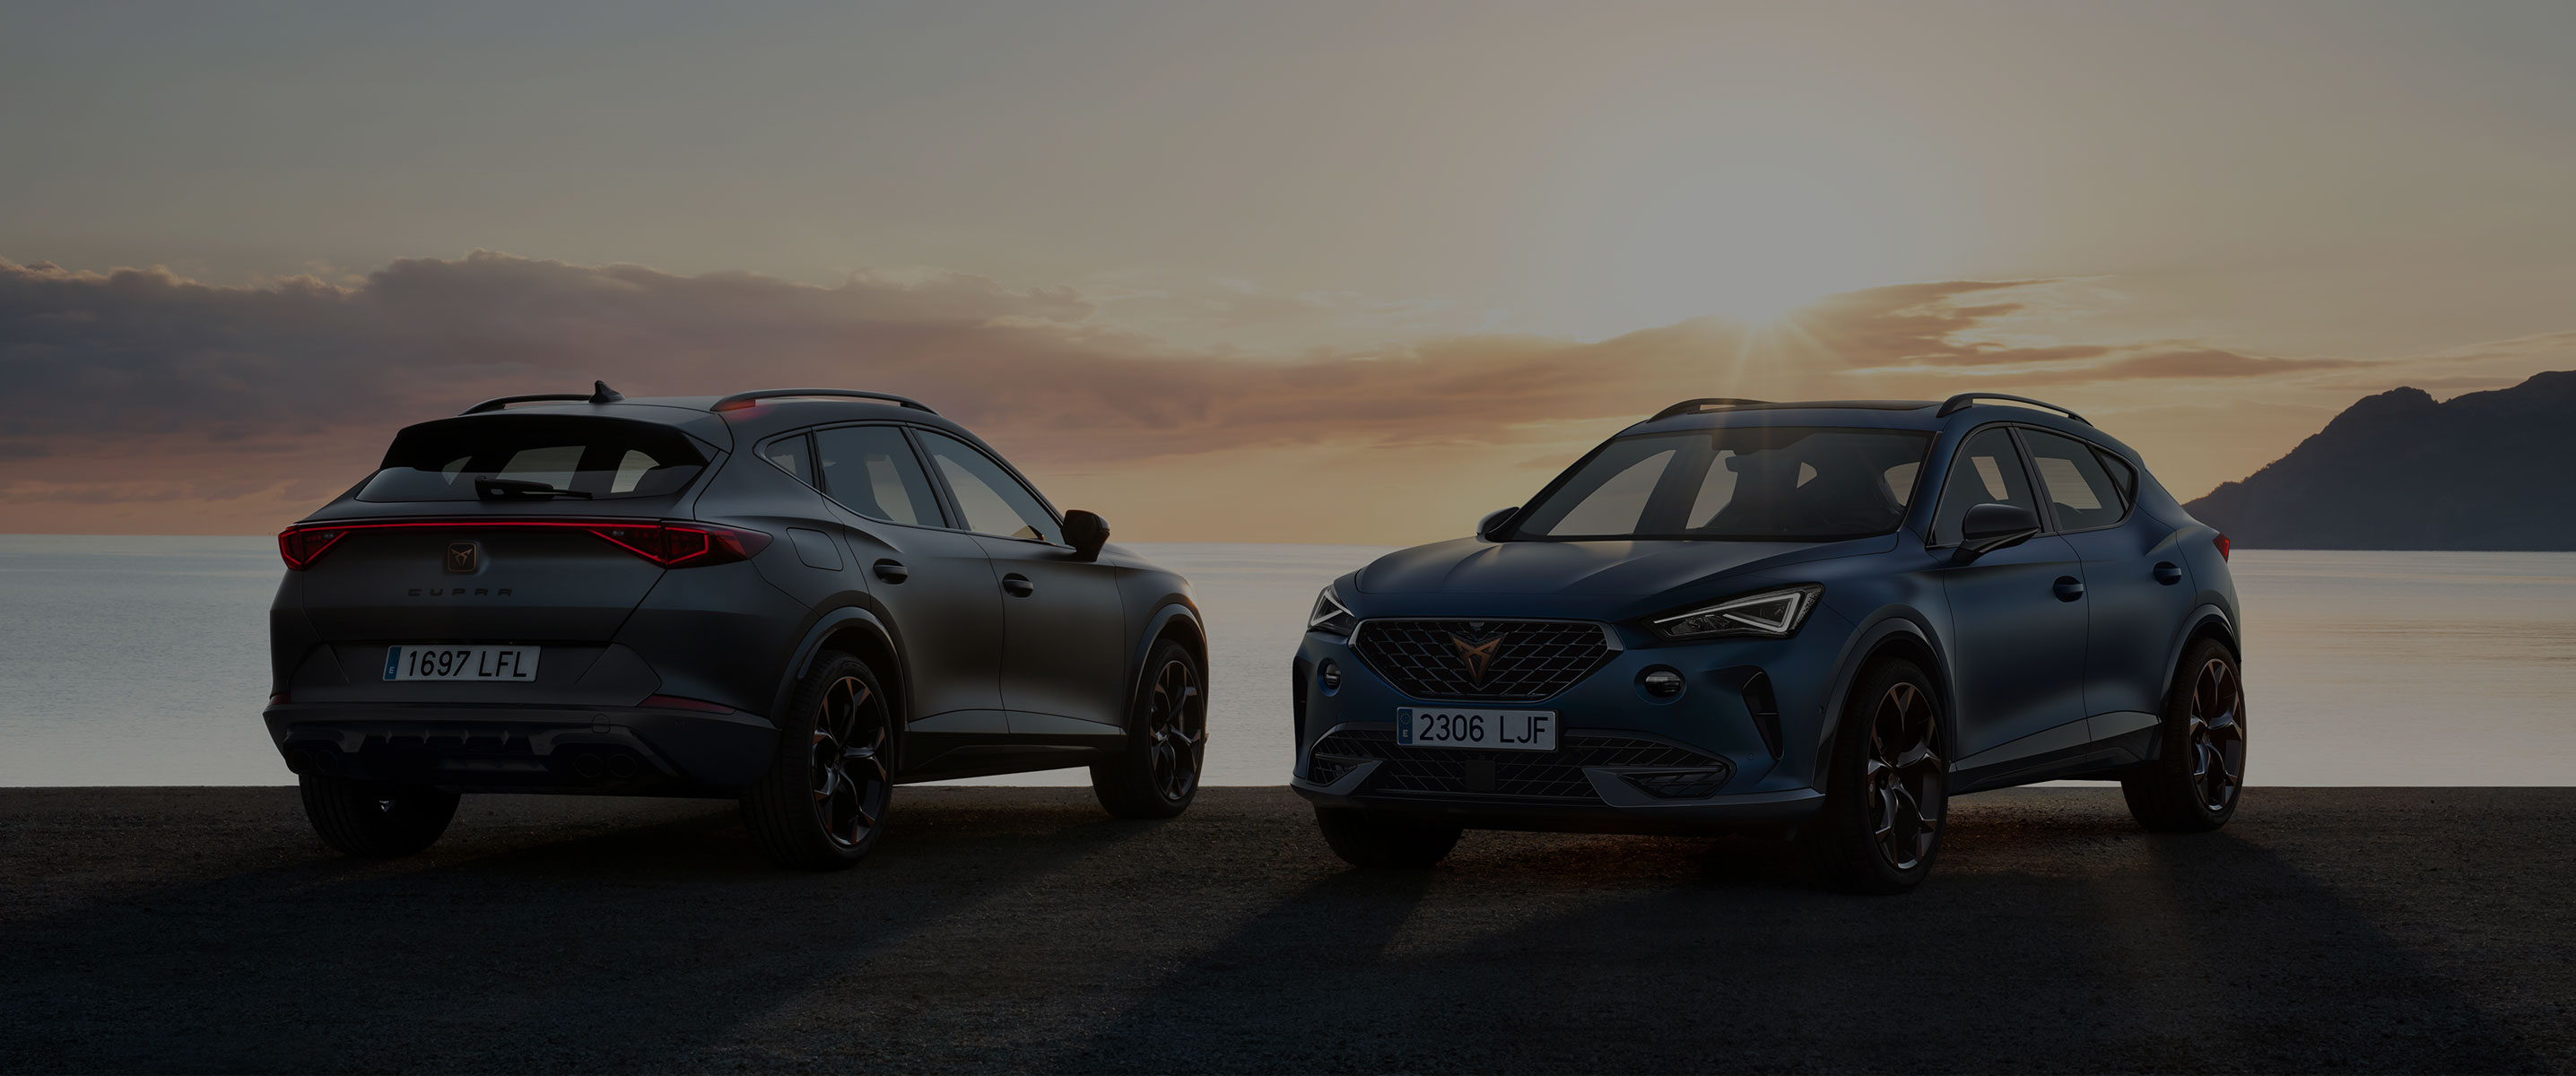 CUPRA Formentor prices & specifications announced